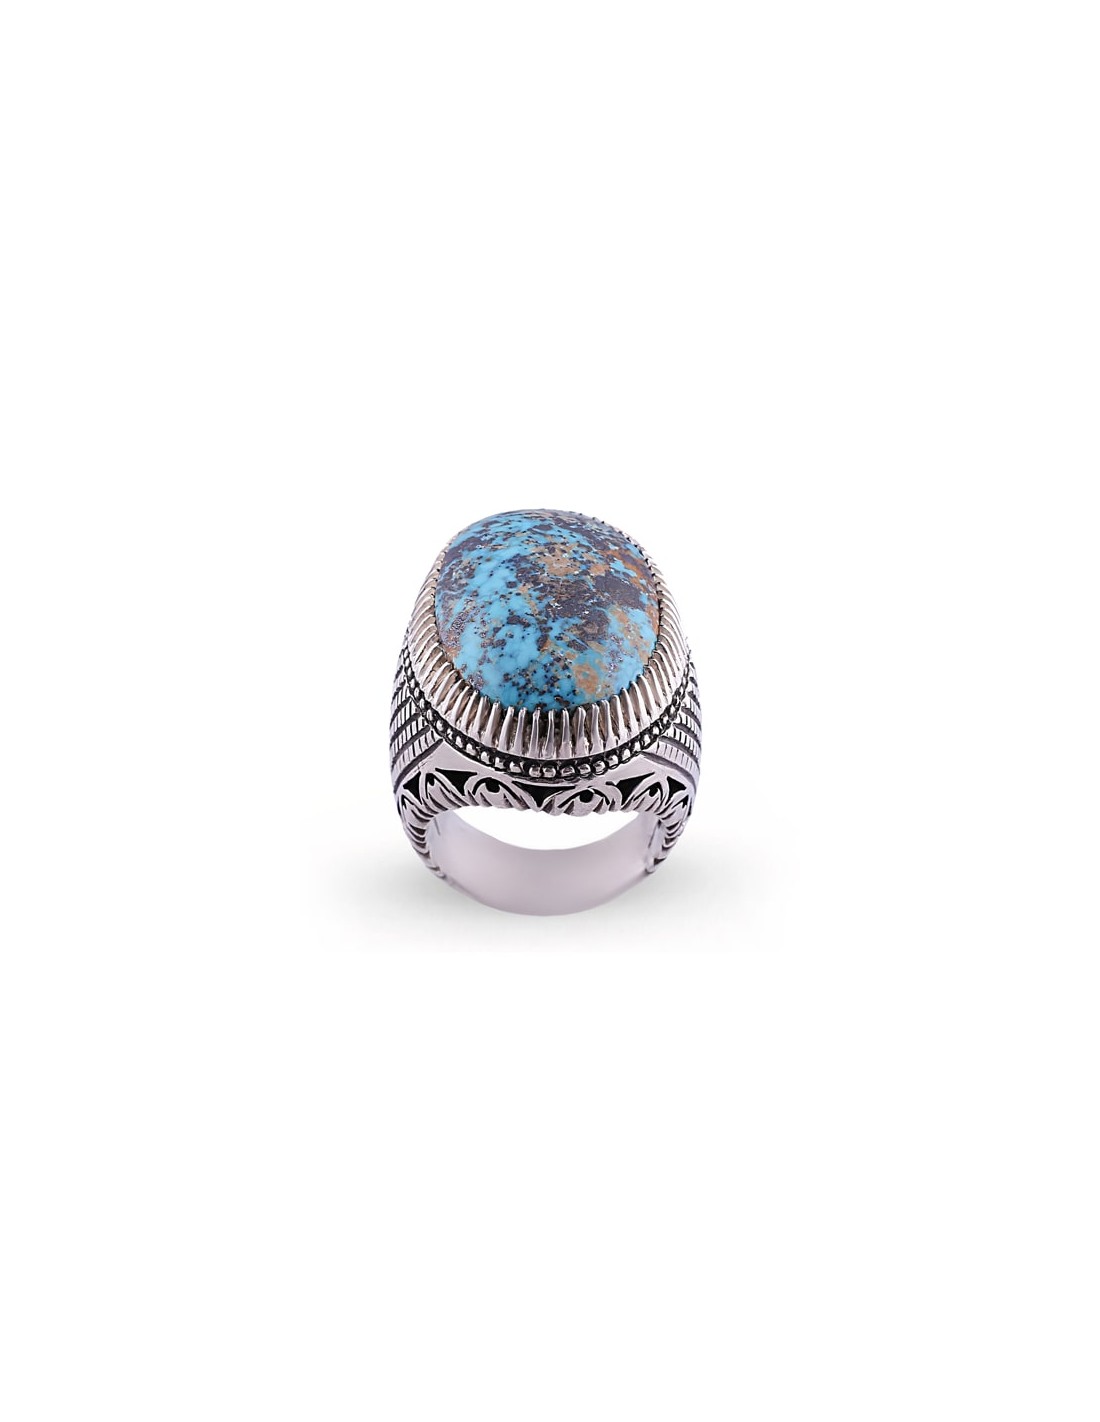 Blue Zircon Men Ring With Turquoise Stones | Boutique Ottoman Exclusive